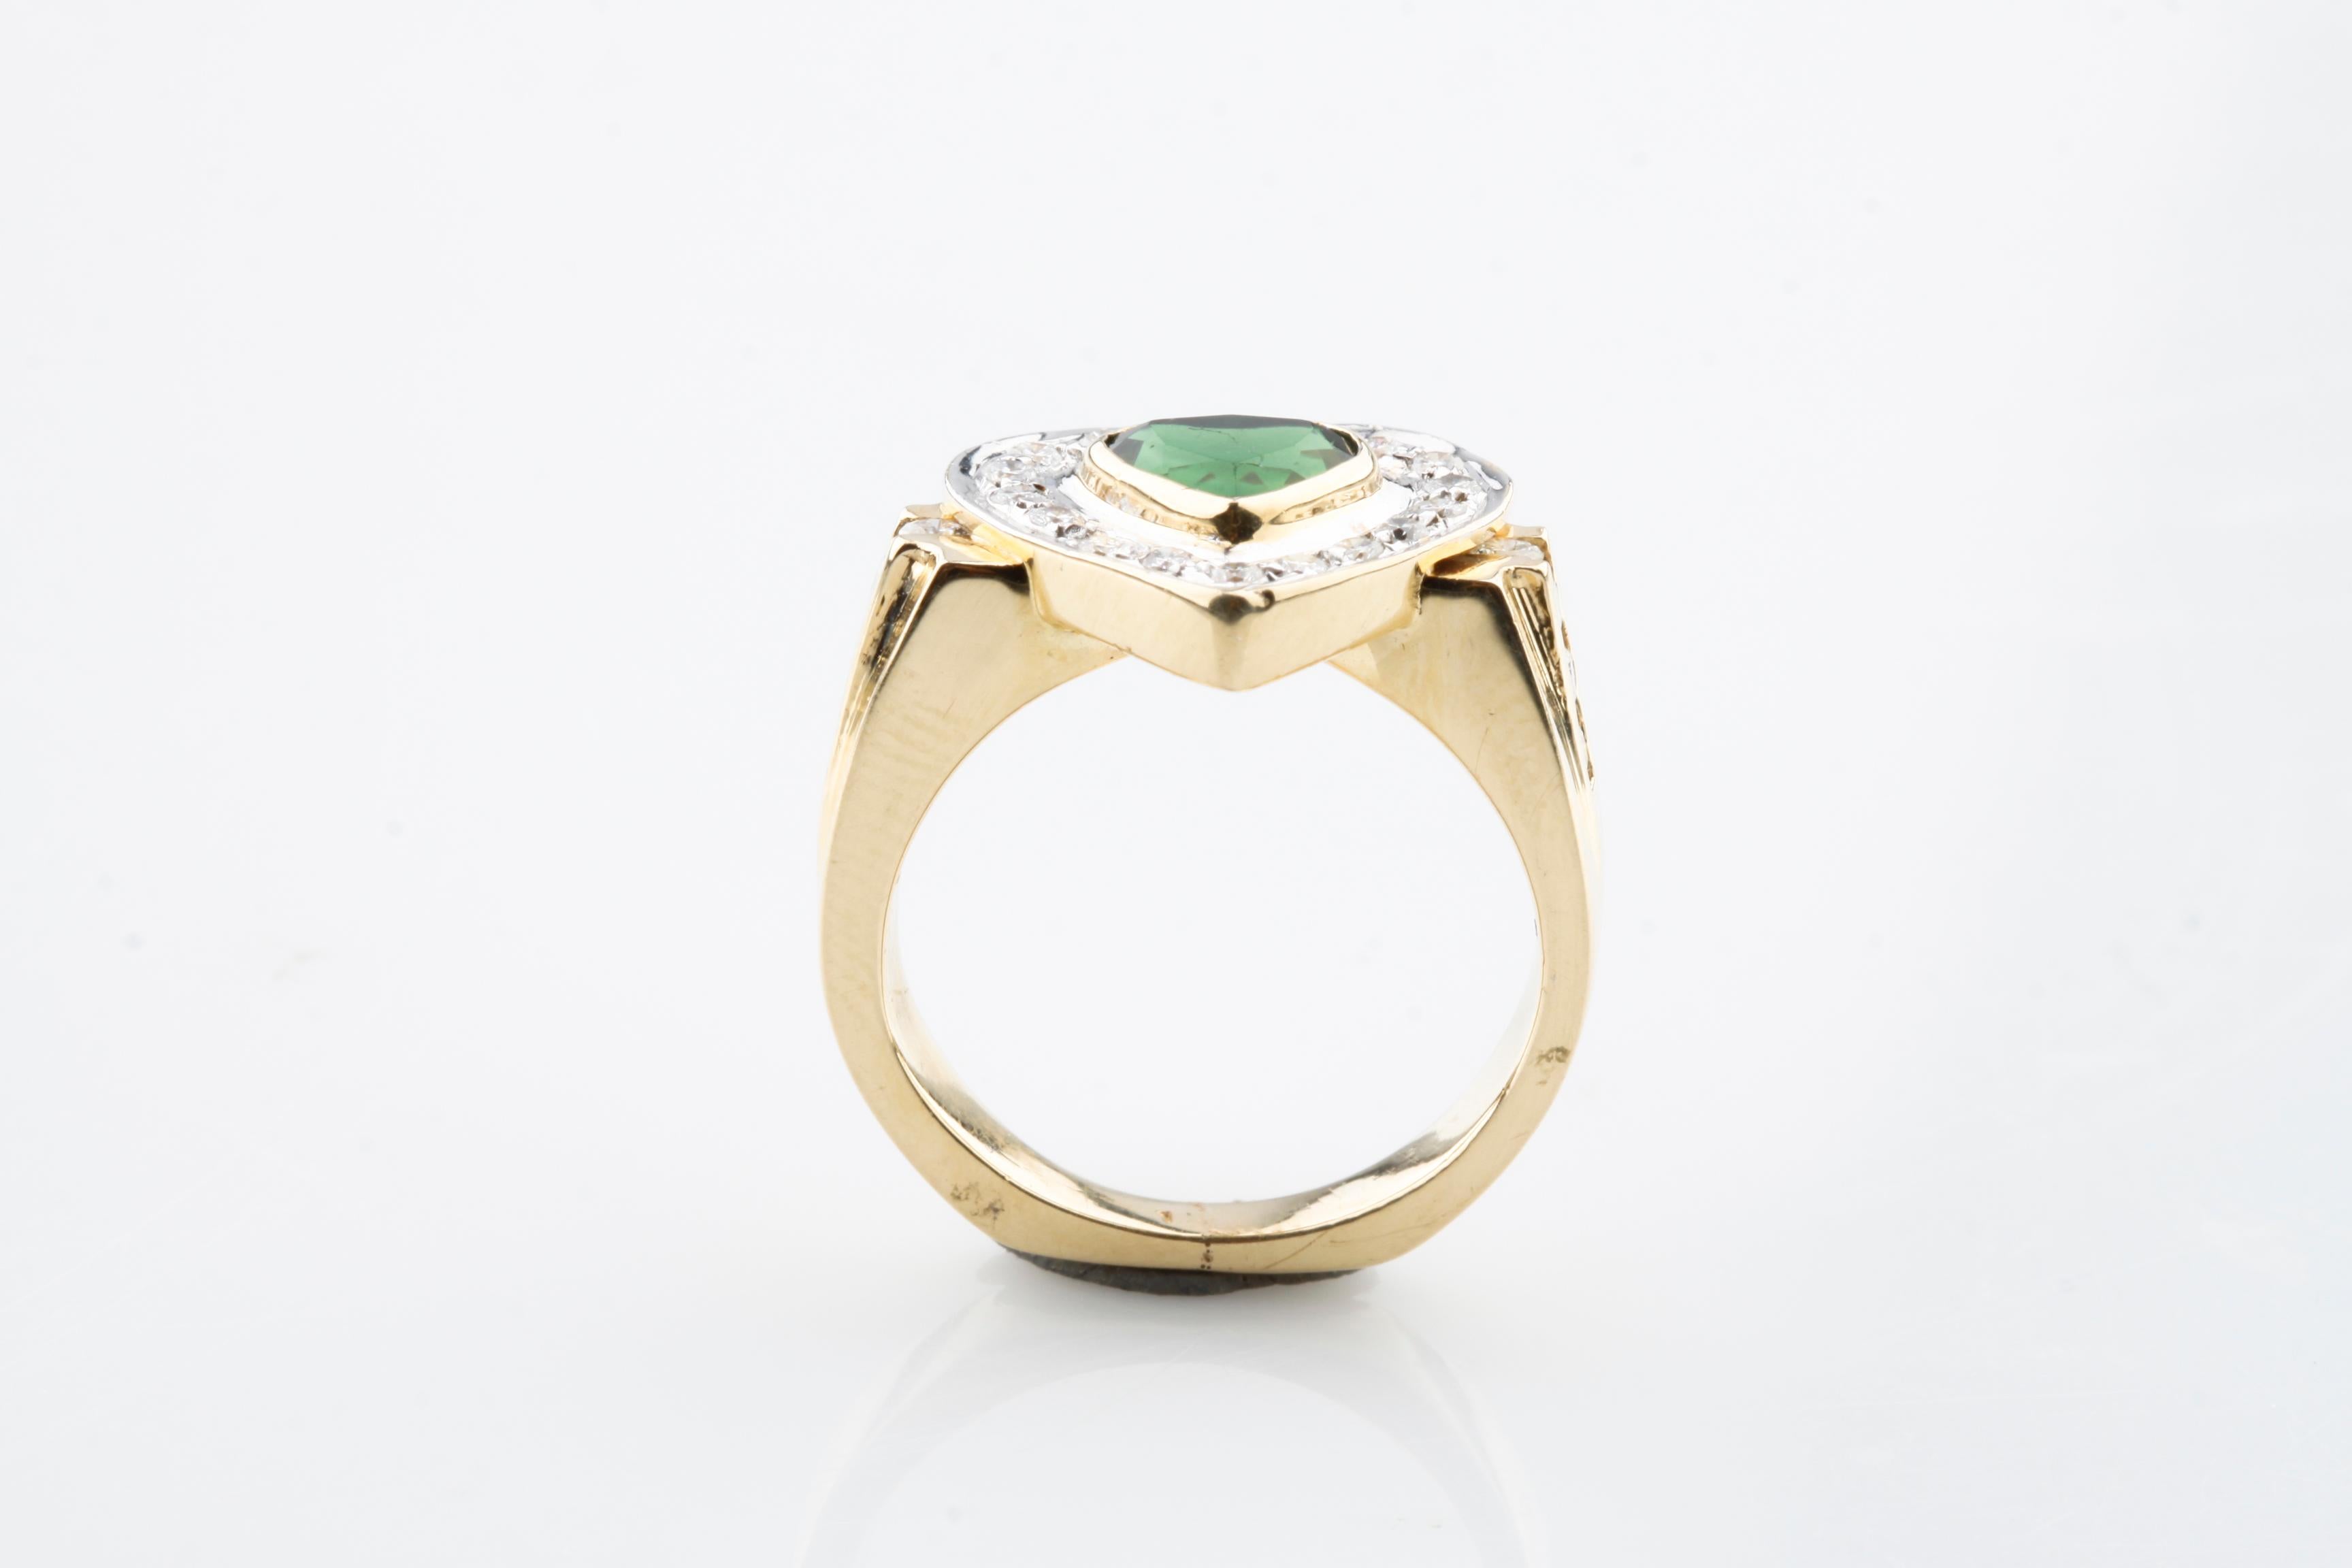 One Electronically tested 14k yellow gold ladies cast green tourmaline and diamond ring. Condition is good. Bright polish finish with rhodium accents.
Containing:
One Bezel Set Heart Mixed Cut Natural Green Tourmaline 
Measuring 6.60 x 5.90 x 4.00